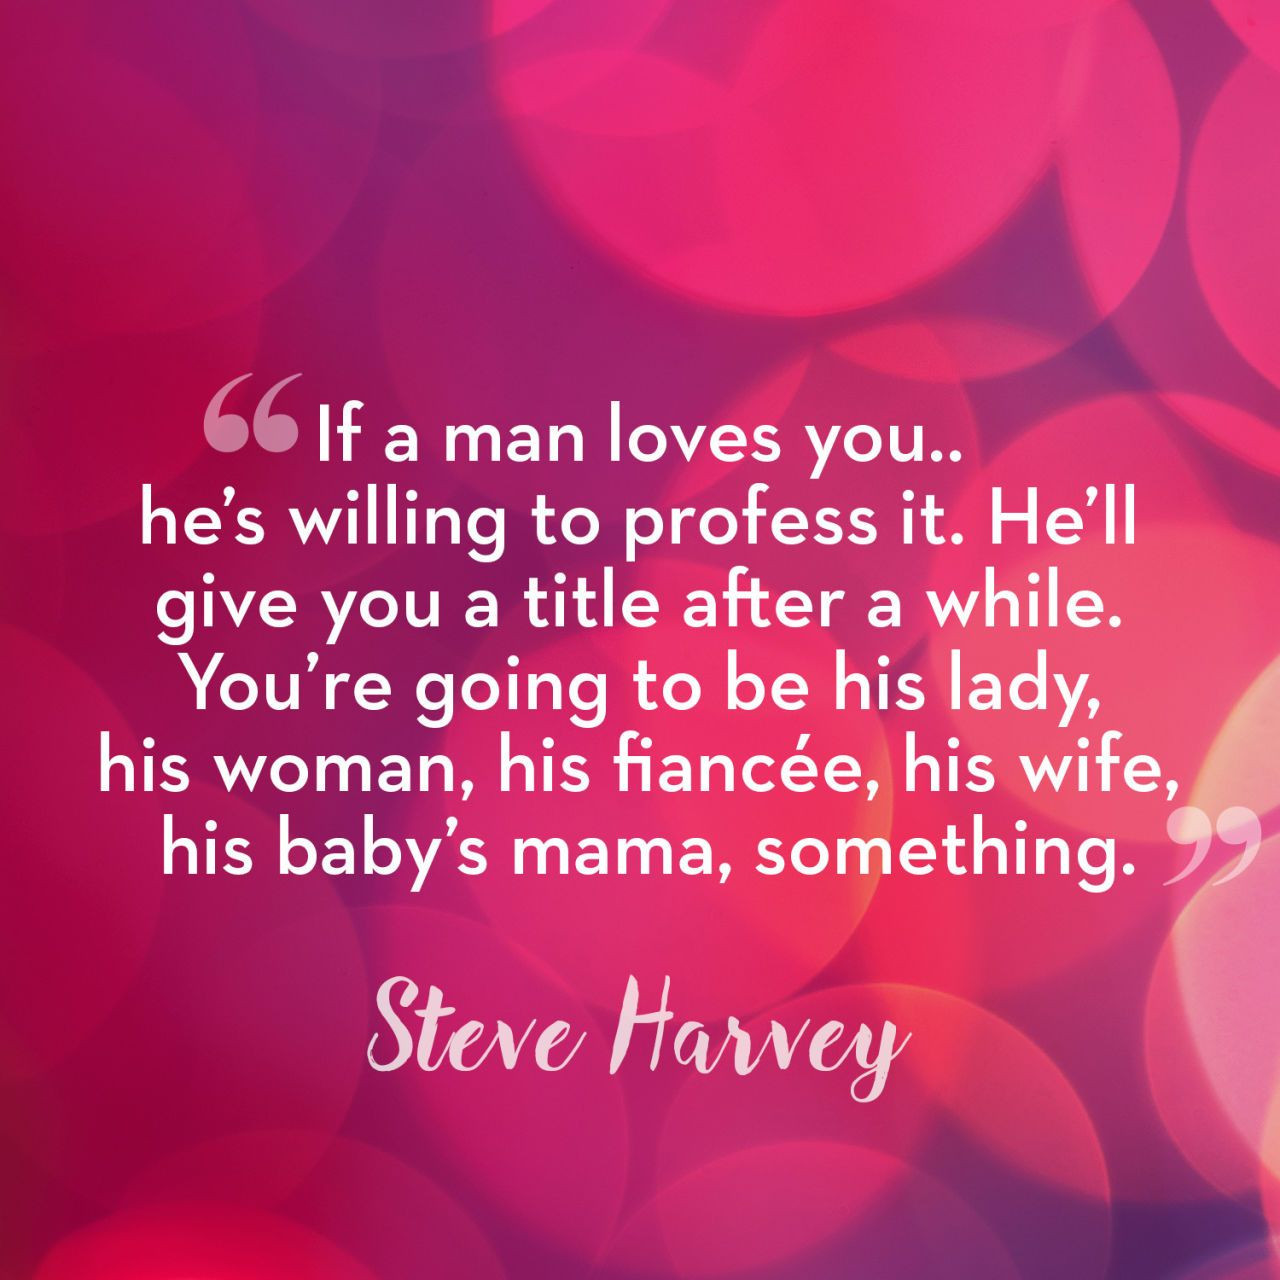 Steve Harvey Relationship Quotes
 50 Times Steve Harvey Reminded Us to Raise Our